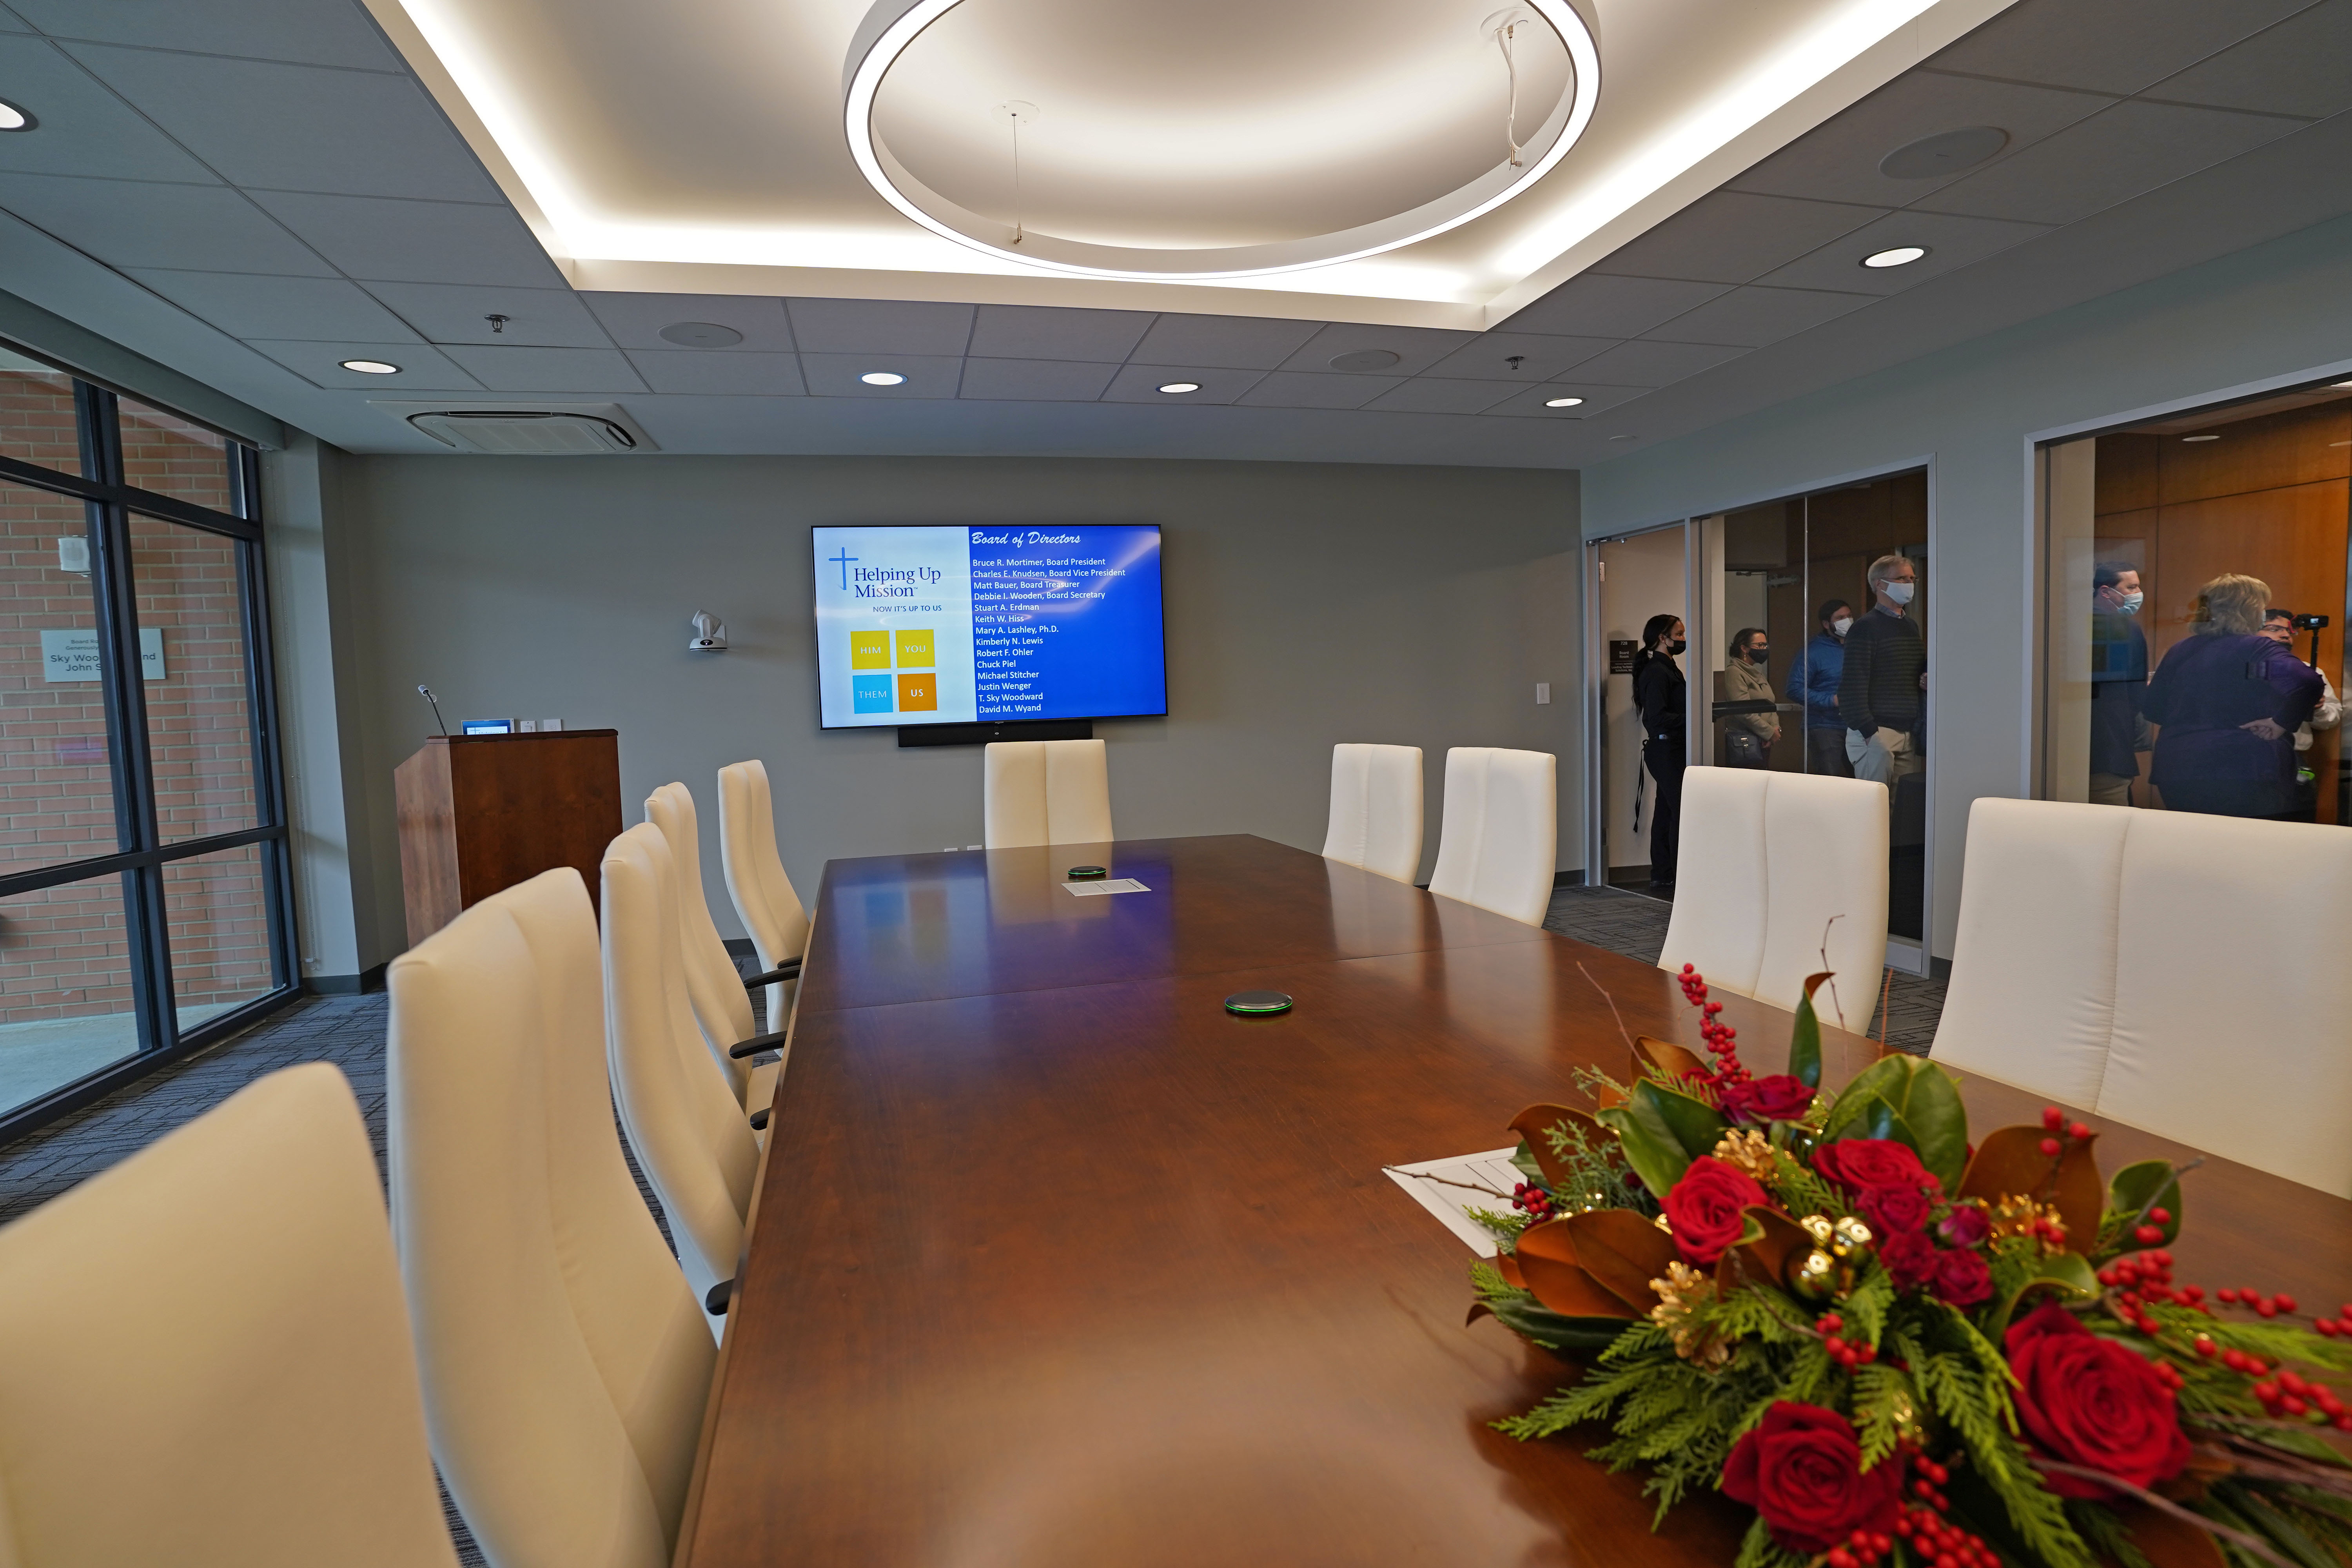 conference room technology by Vision Technologies for Helping Up Mission